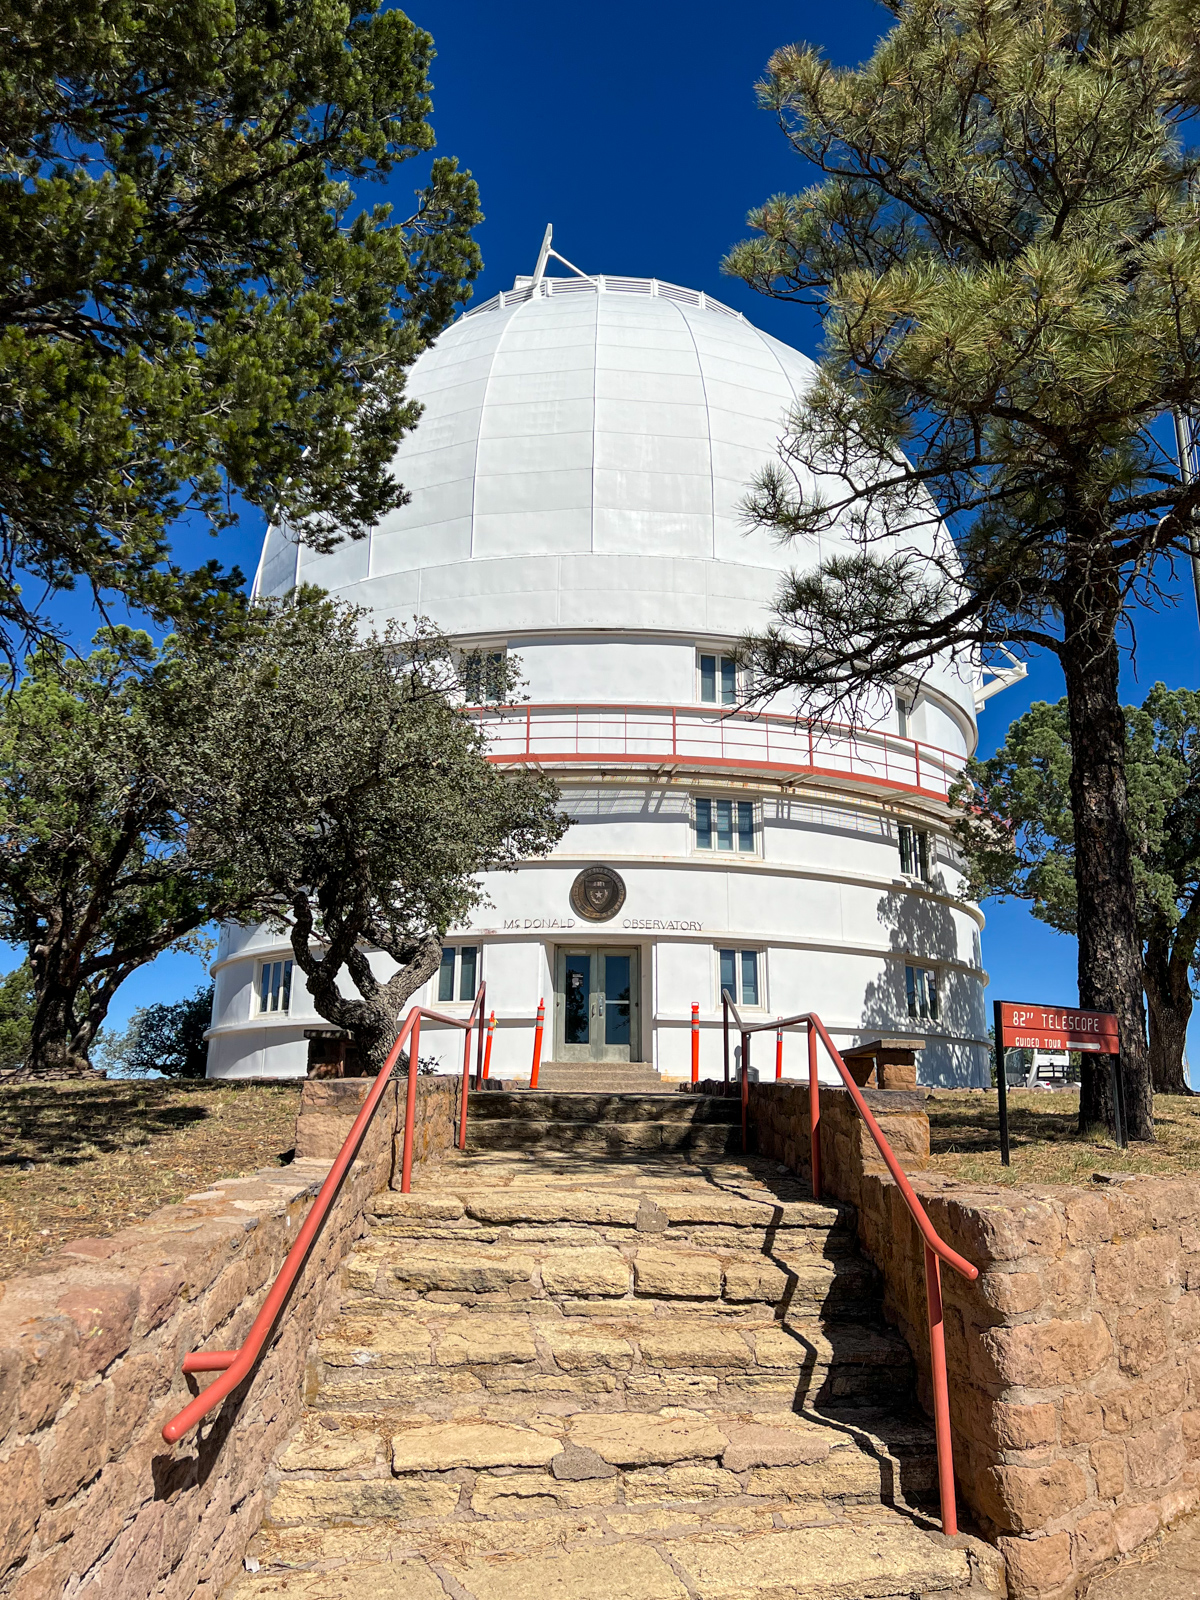 The 82-inch Otto Struve Telescope at McDonald Observatory in Texas